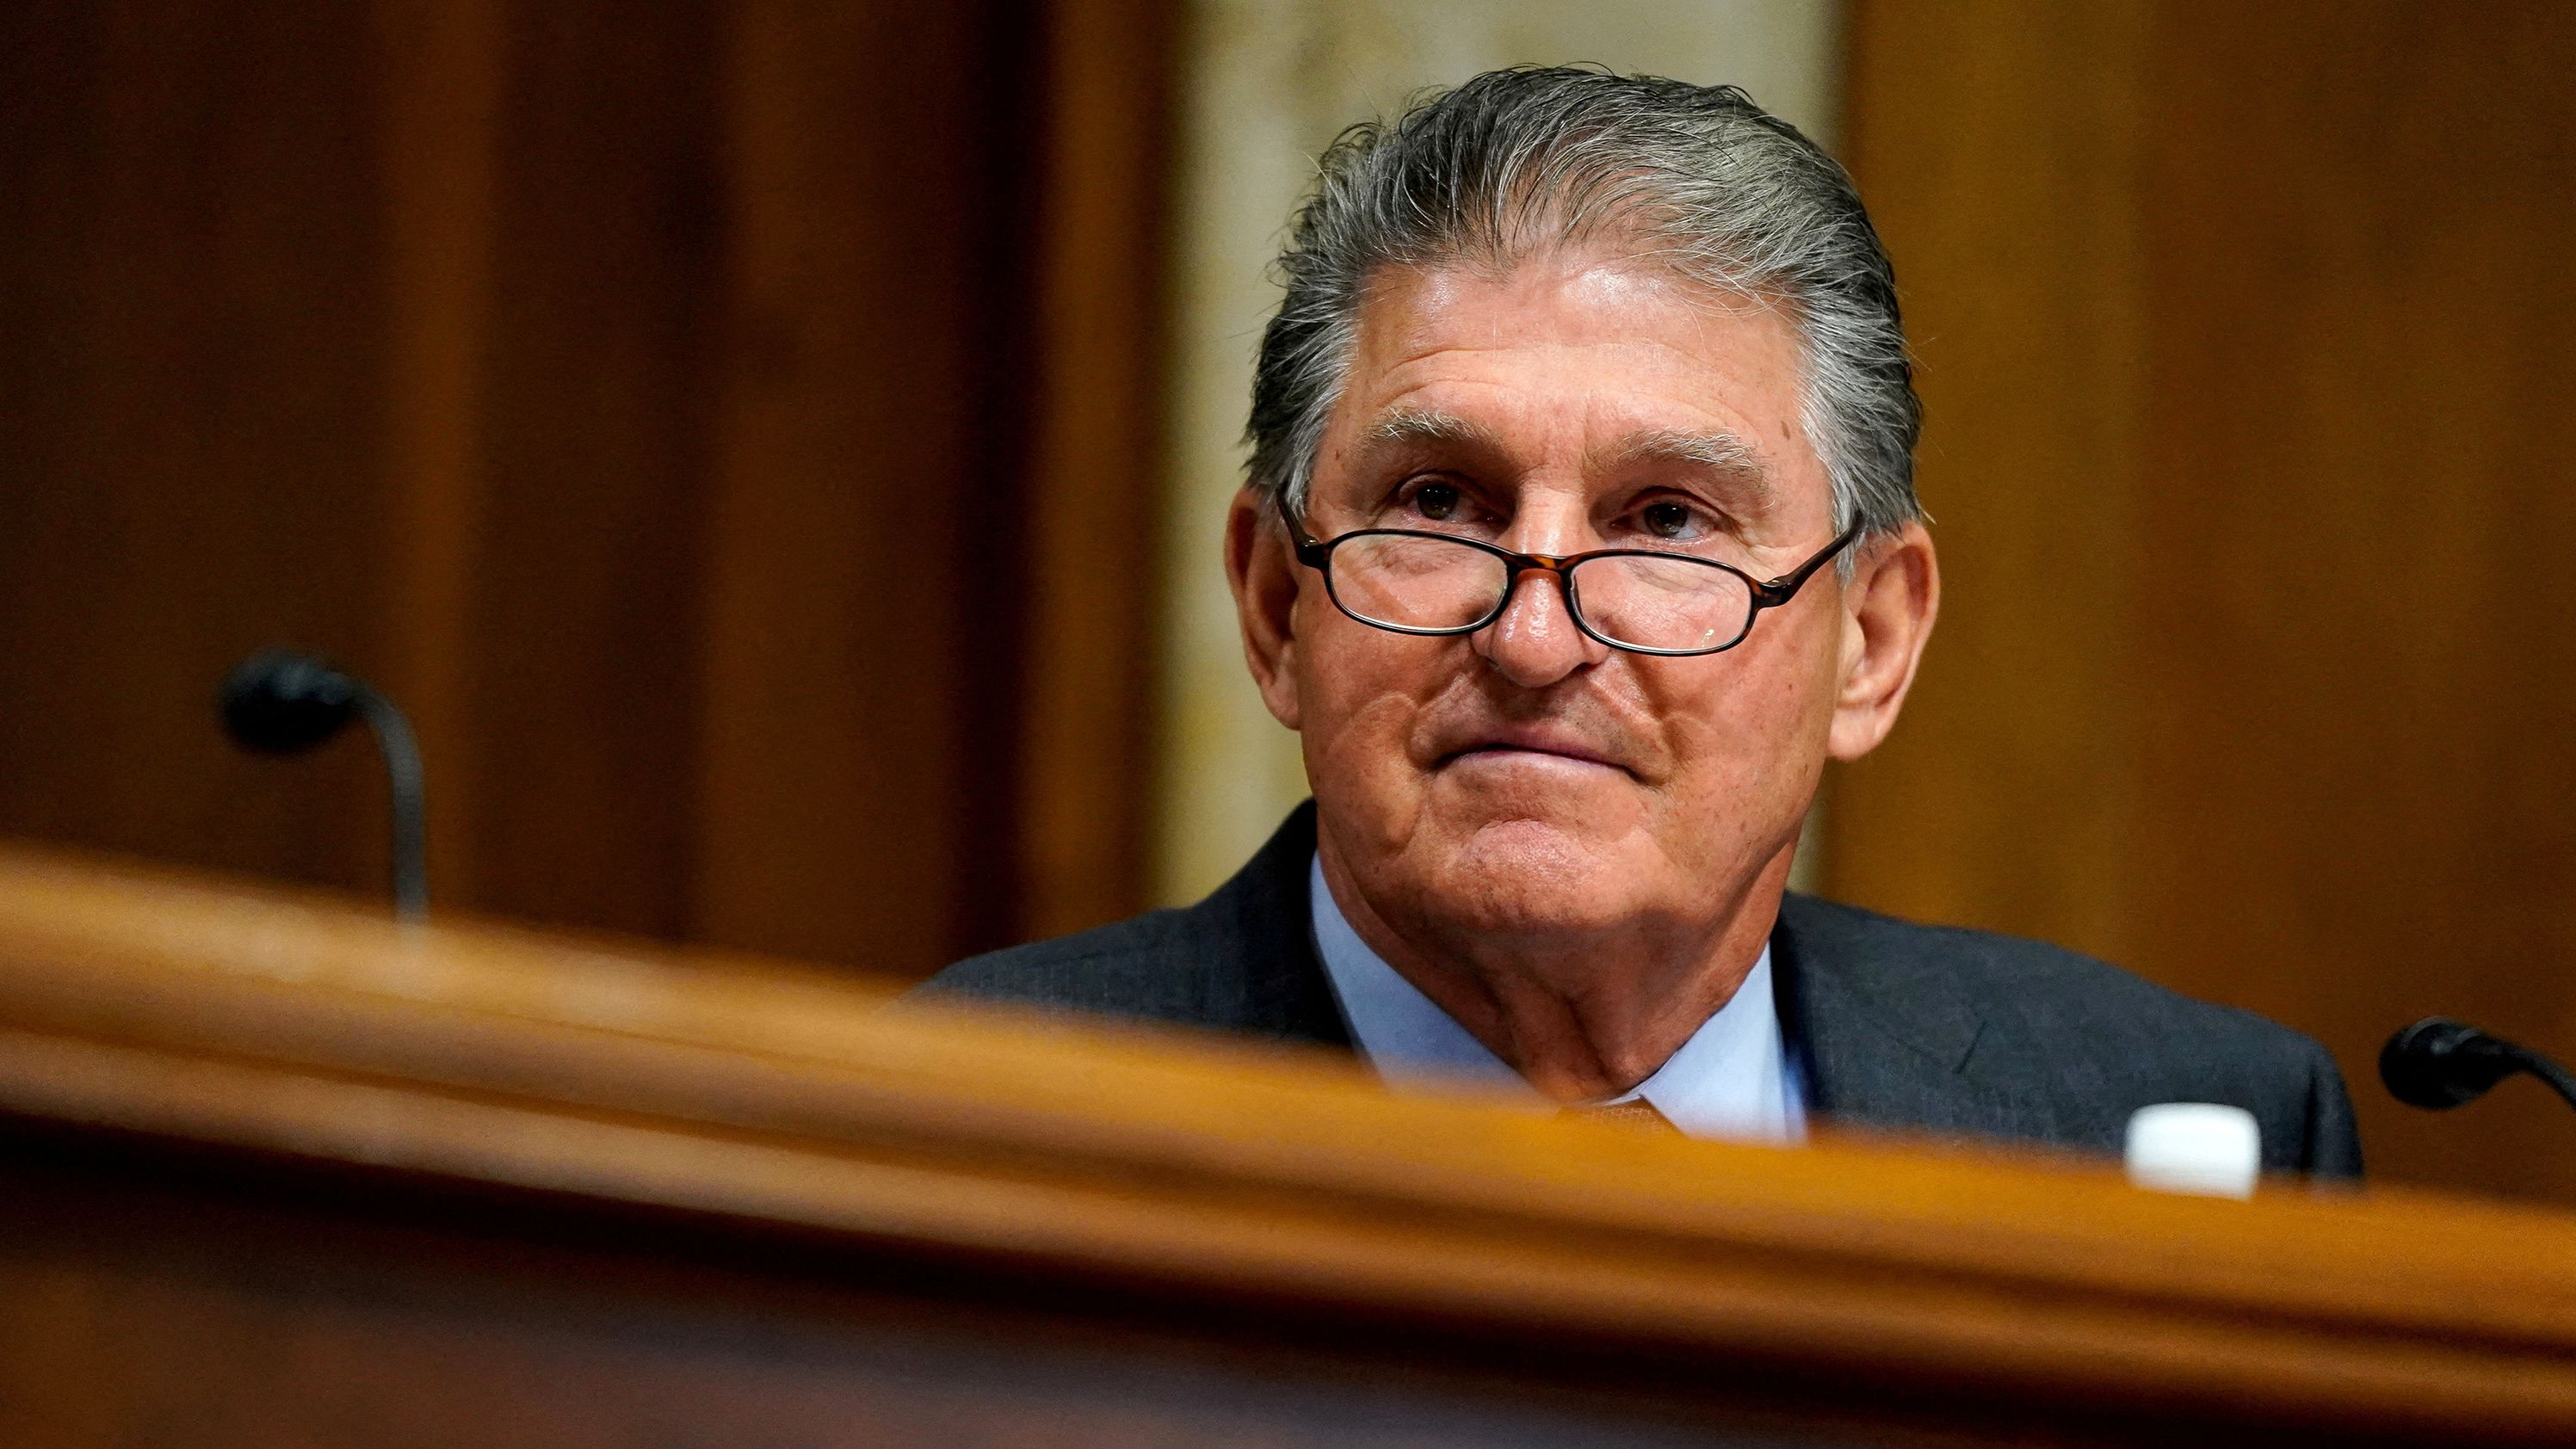 Manchin and the rest of West Virginia's congressional delegation are strong advocates for the Mountain Valley Pipeline.